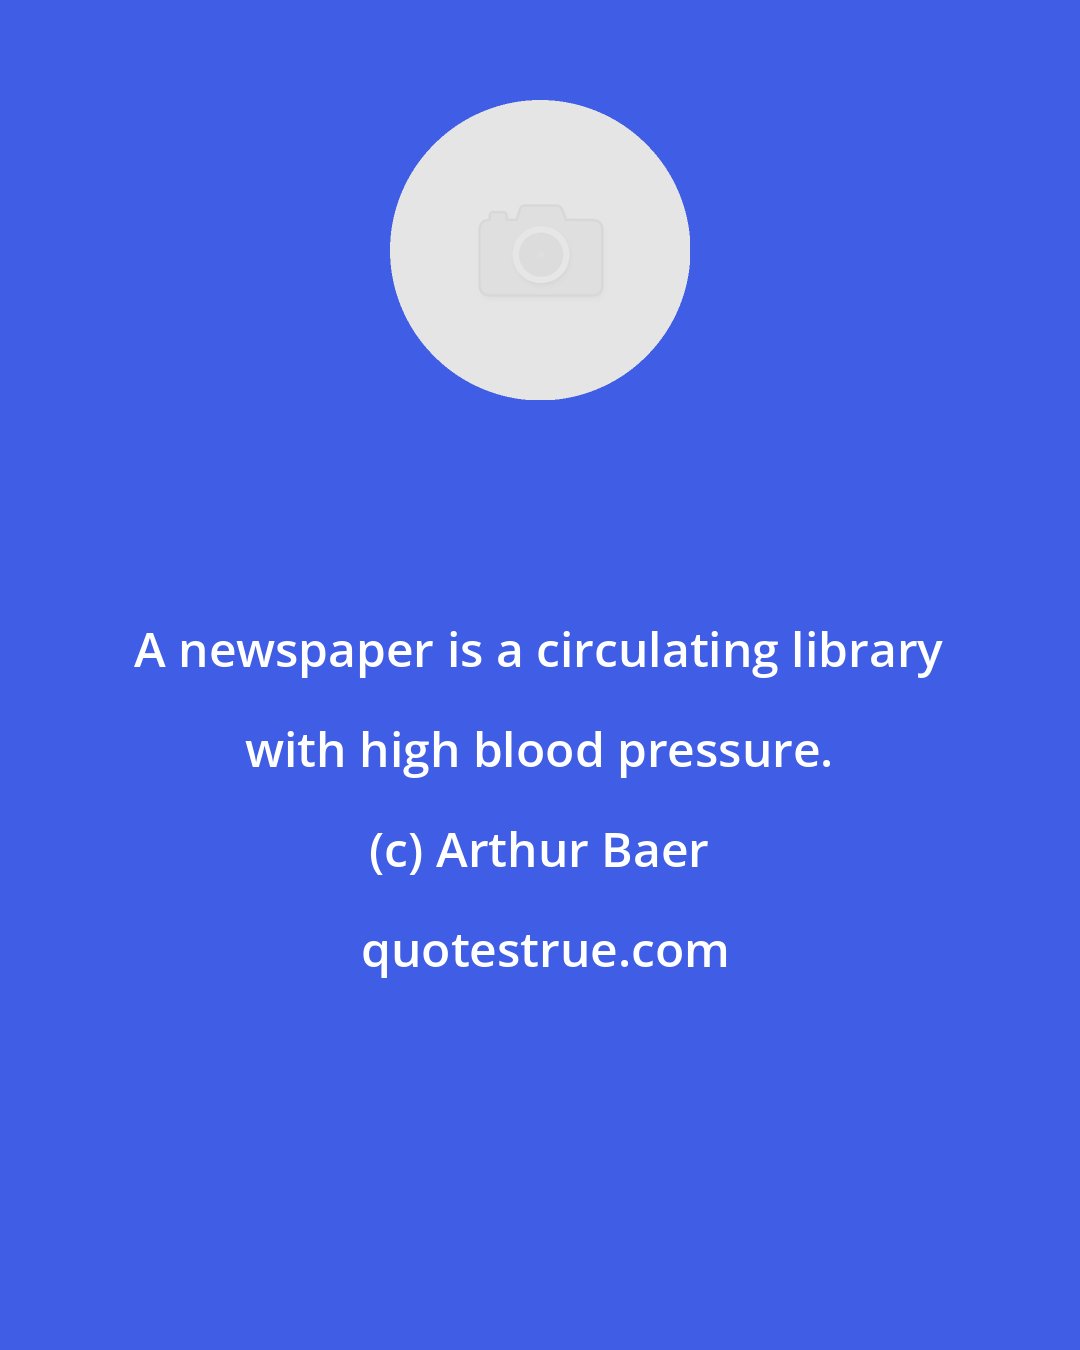 Arthur Baer: A newspaper is a circulating library with high blood pressure.